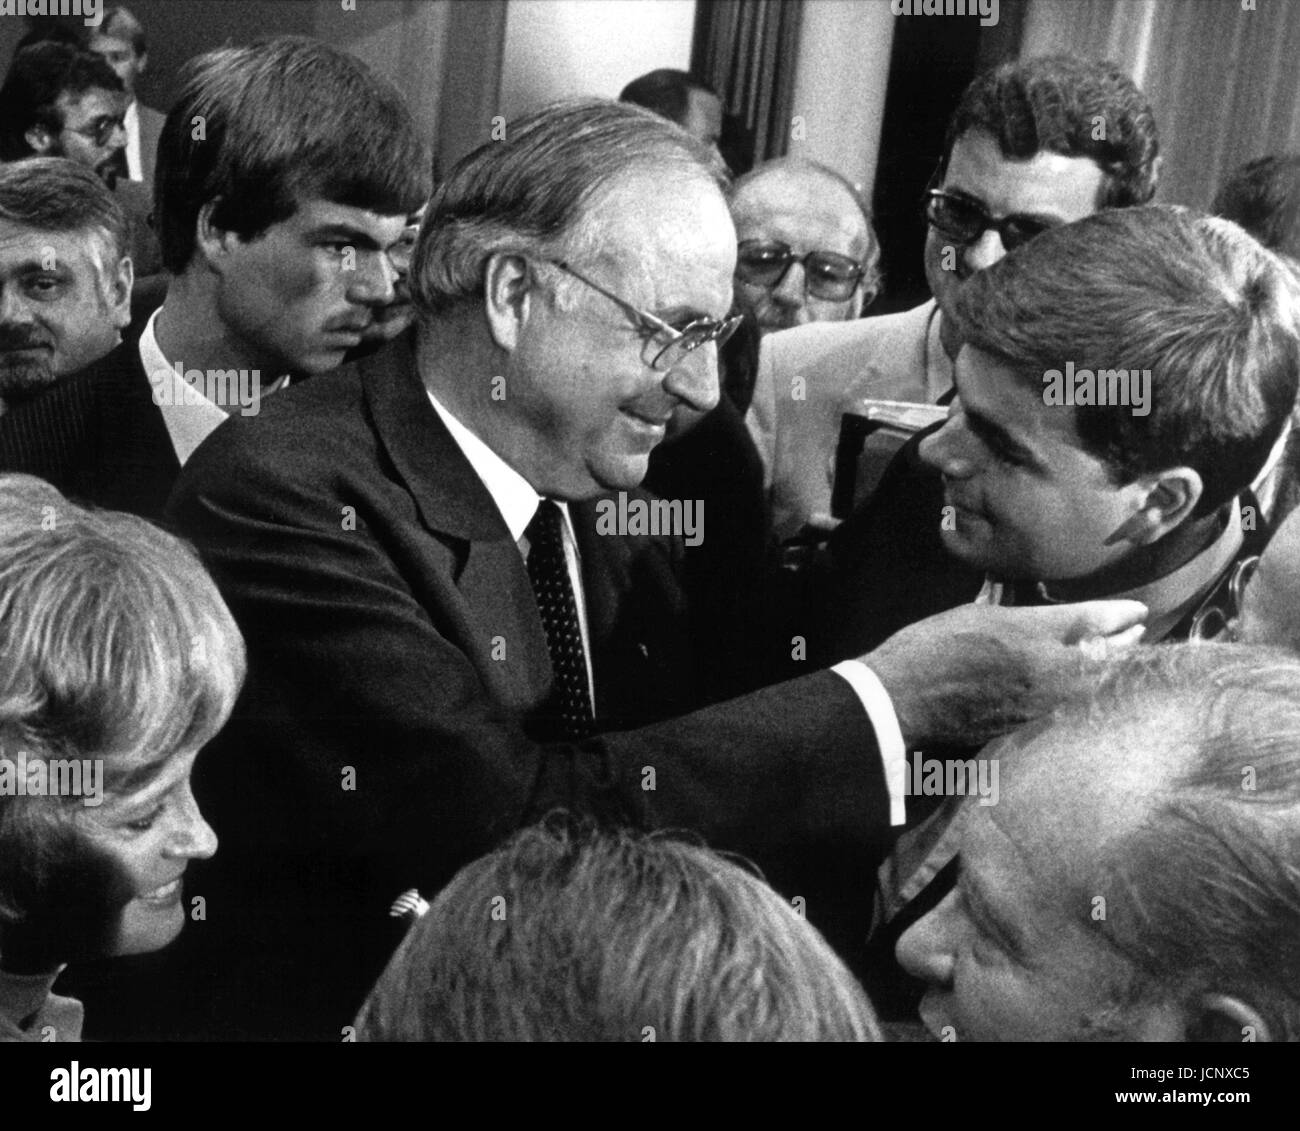 (dpa files) - Newly elected chancellor Helmut Kohl happily hugs his son Walter (R) in Bonn, West Germany, 1 October 1982. In the background: his son Peter (back L) and his wife Hannelore. That day, Chancellor Helmut Schmidt was deposed through a constructive vote of no-confidence in the Bundestag. 249 out of 495 members of parliament had voted for Kohl, seven more than necessary for an absolute majority. After 13 years in power the social liberal coalition had come to an end on 17 September 1982 when the four ministers Genscher, Baum, Ertl, and Count Lambsdorff resigned which led to the overth Stock Photo